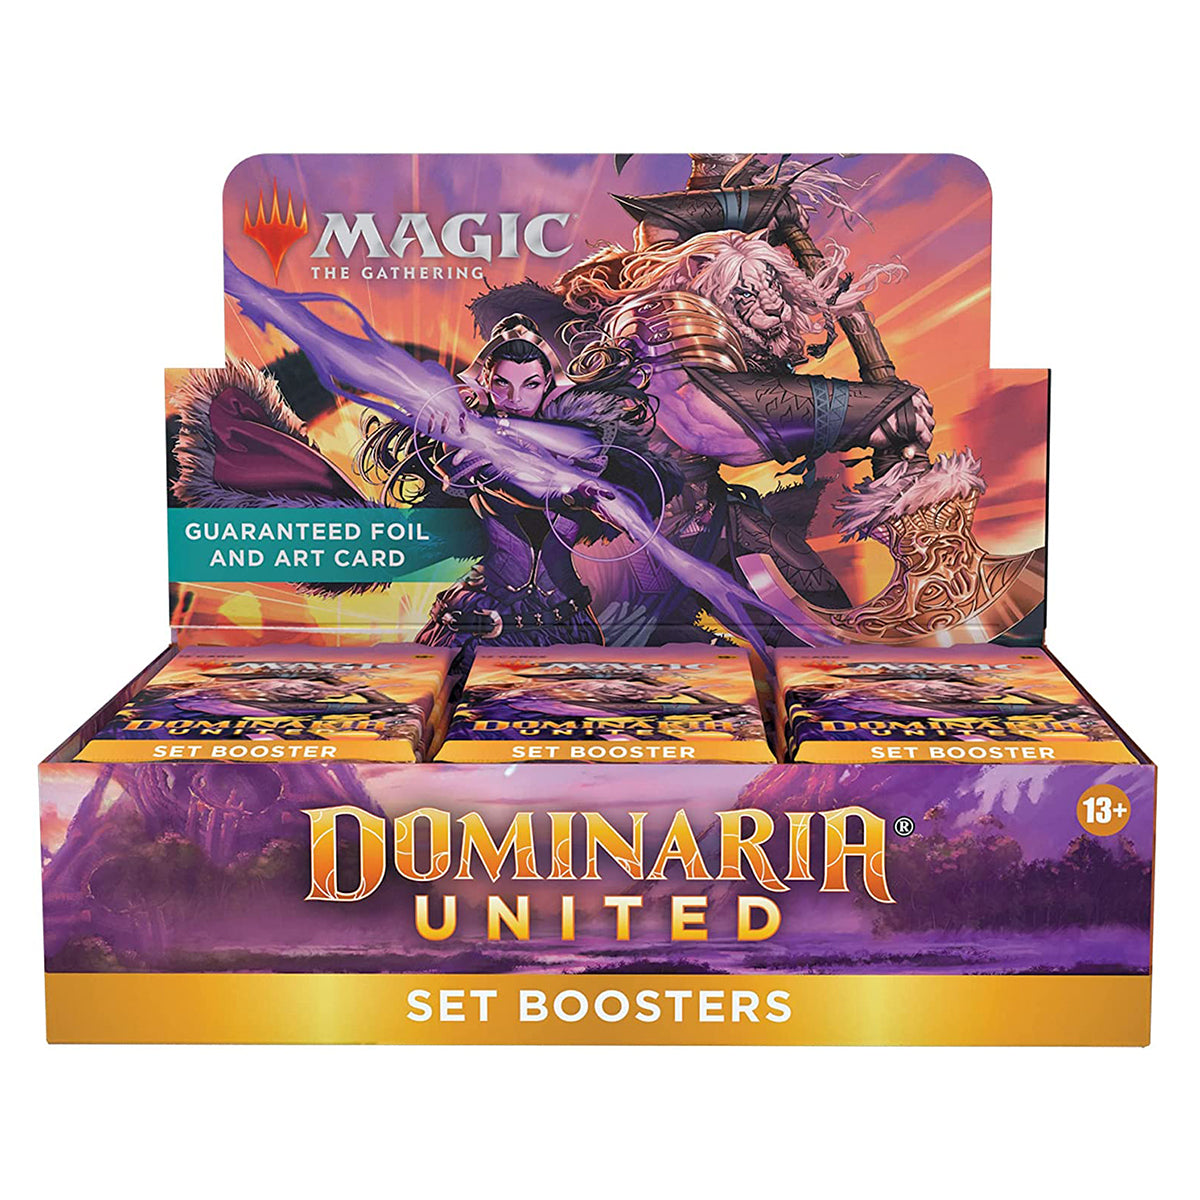 8 Set Boosters The Gathering Dominaria United Bundle Accessories Magic 